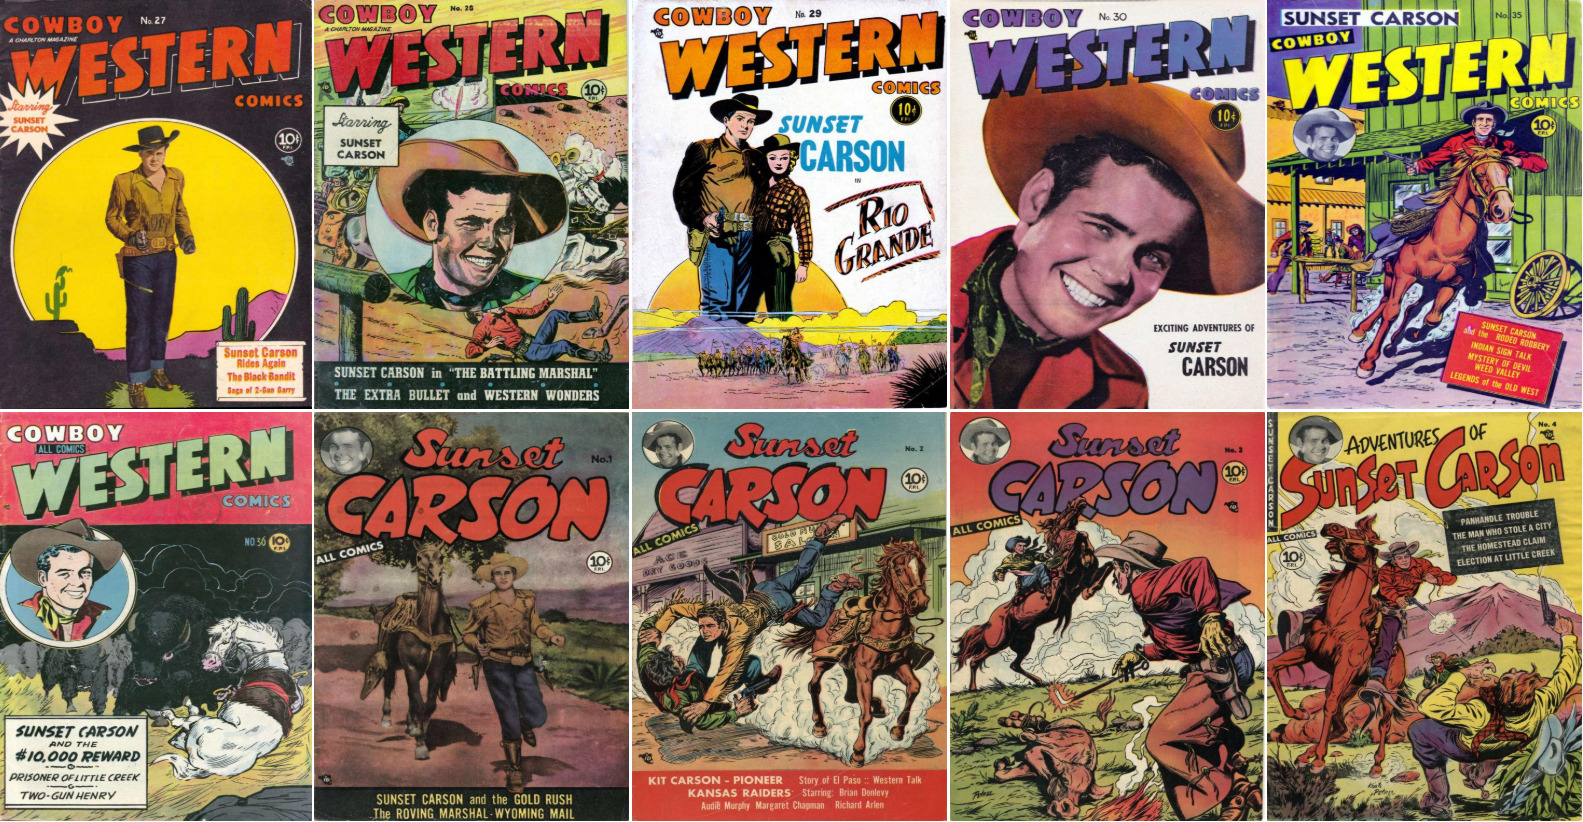 1950 - 1952 Sunset Carson Comic Book Package - 11 eBooks on CD